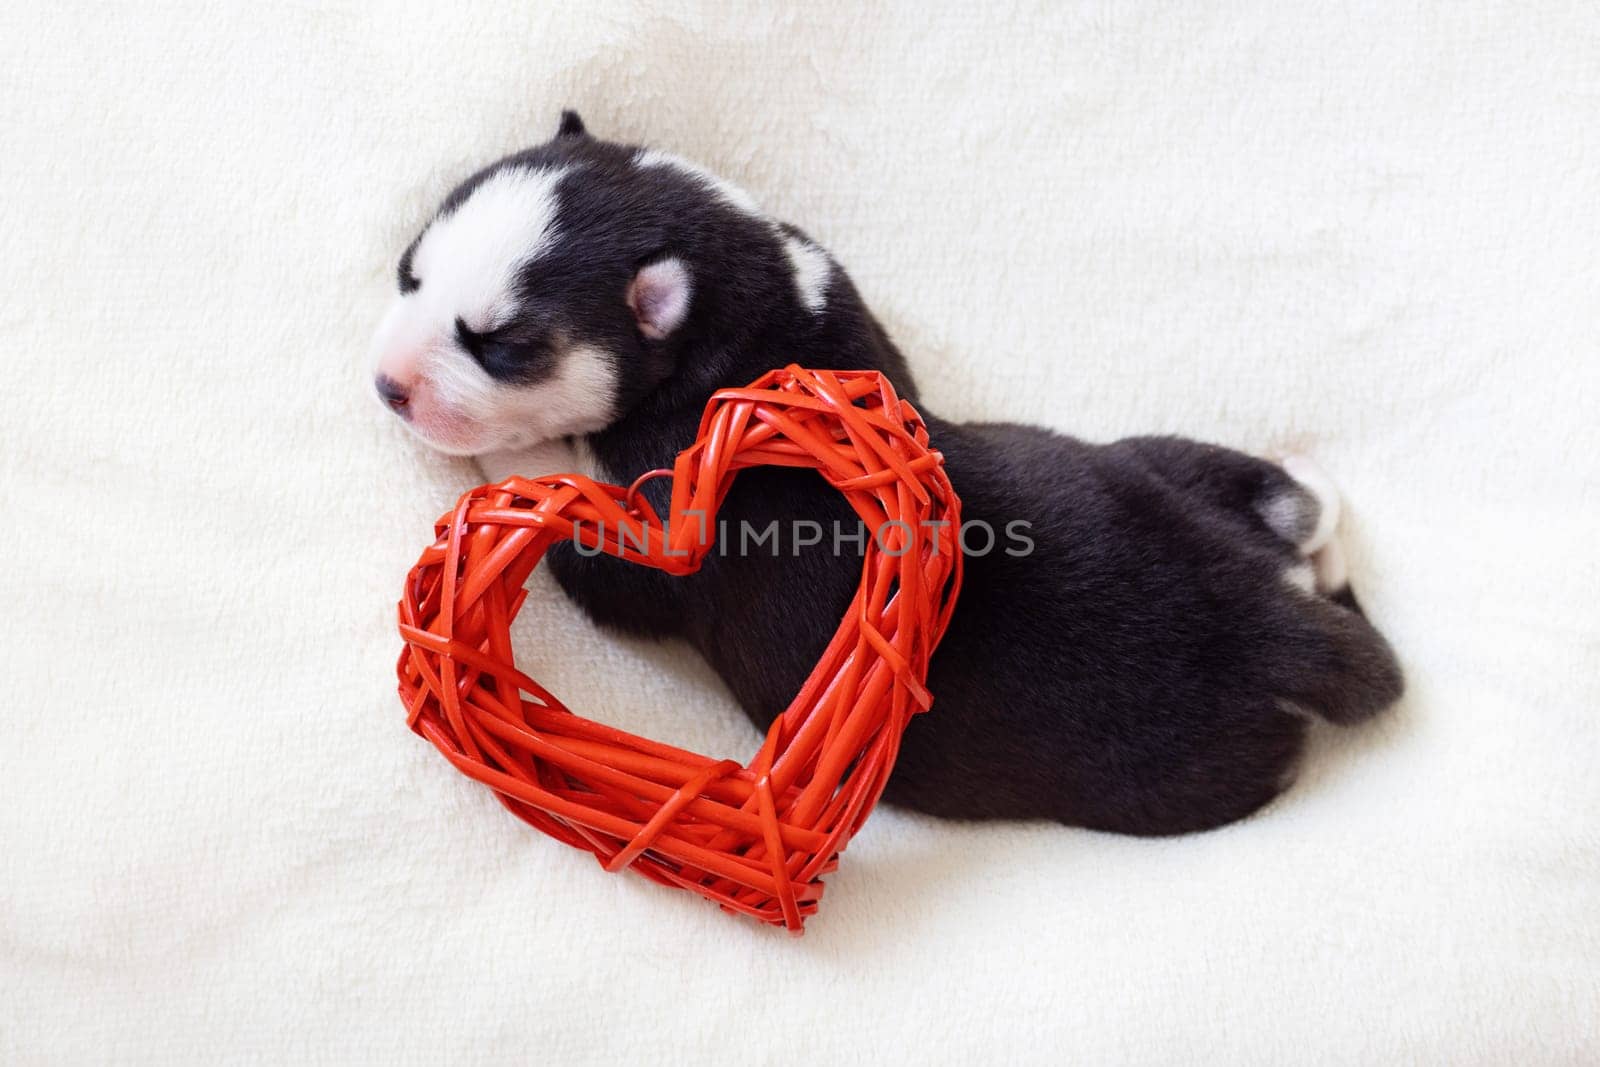 Cute siberian husky puppy sleeps with red heart on a white fluffy background. A newborn puppy on a light background. Empty space for text.